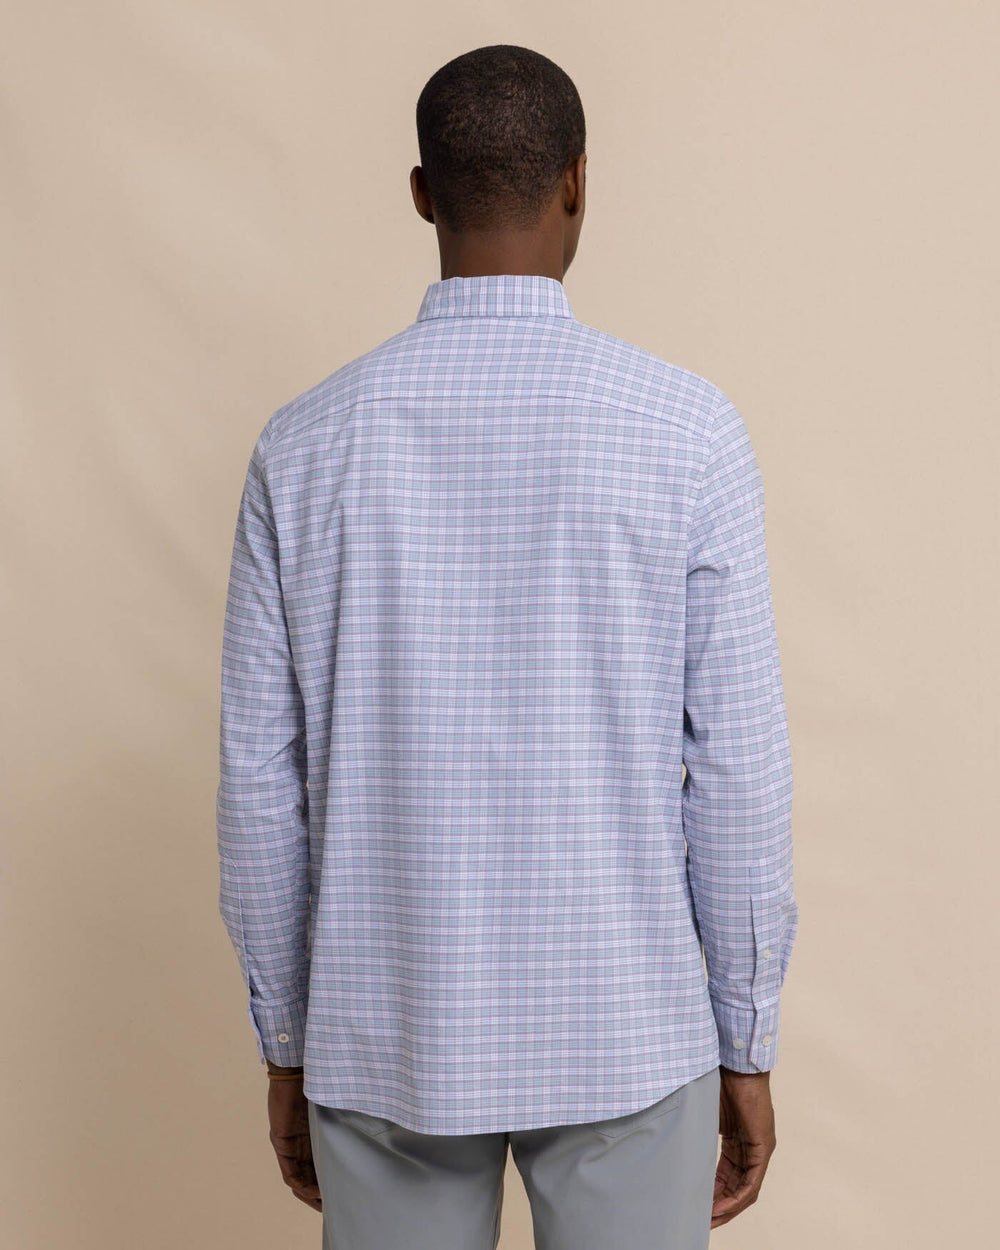 The back view of the Southern Tide Coastal Passage Trailside Plaid Long Sleeve SportShirt by Southern Tide - Subdued Blue